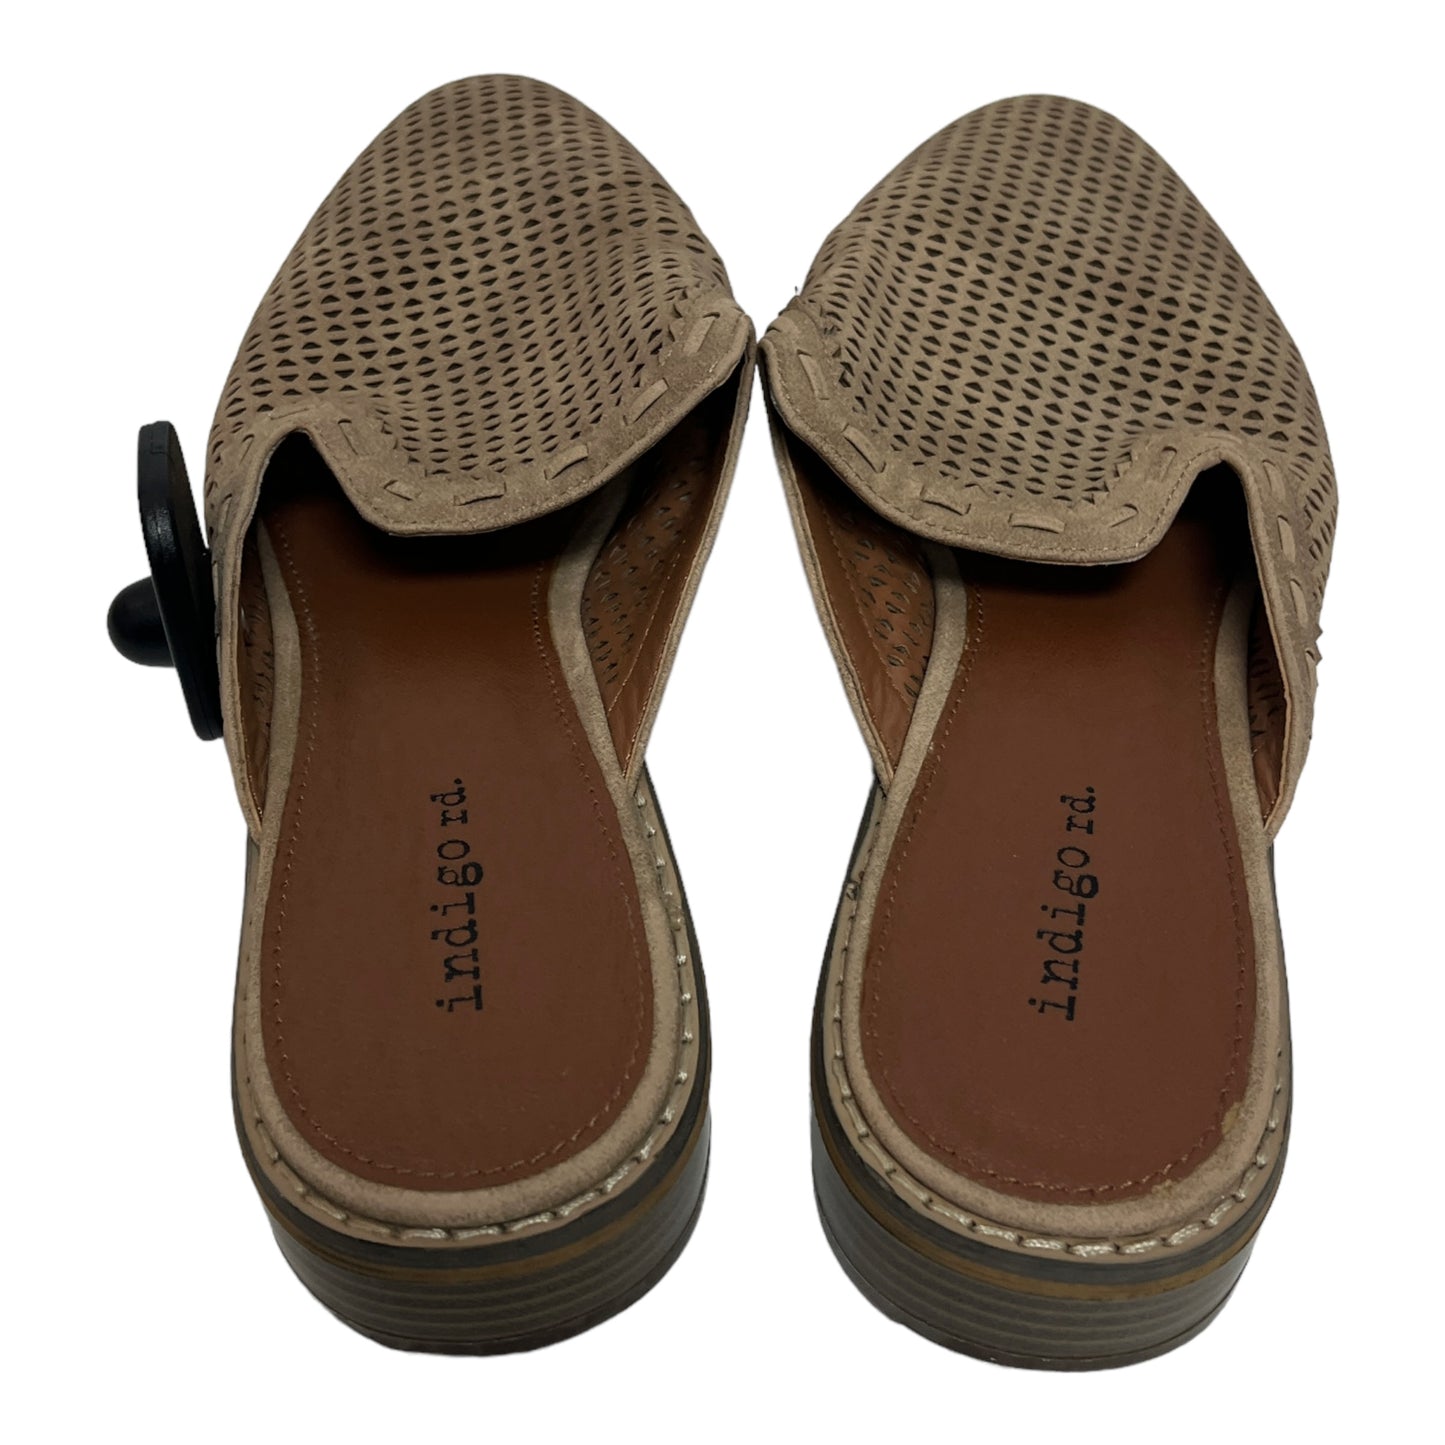 Shoes Flats Mule & Slide By Indigo Rd  Size: 9